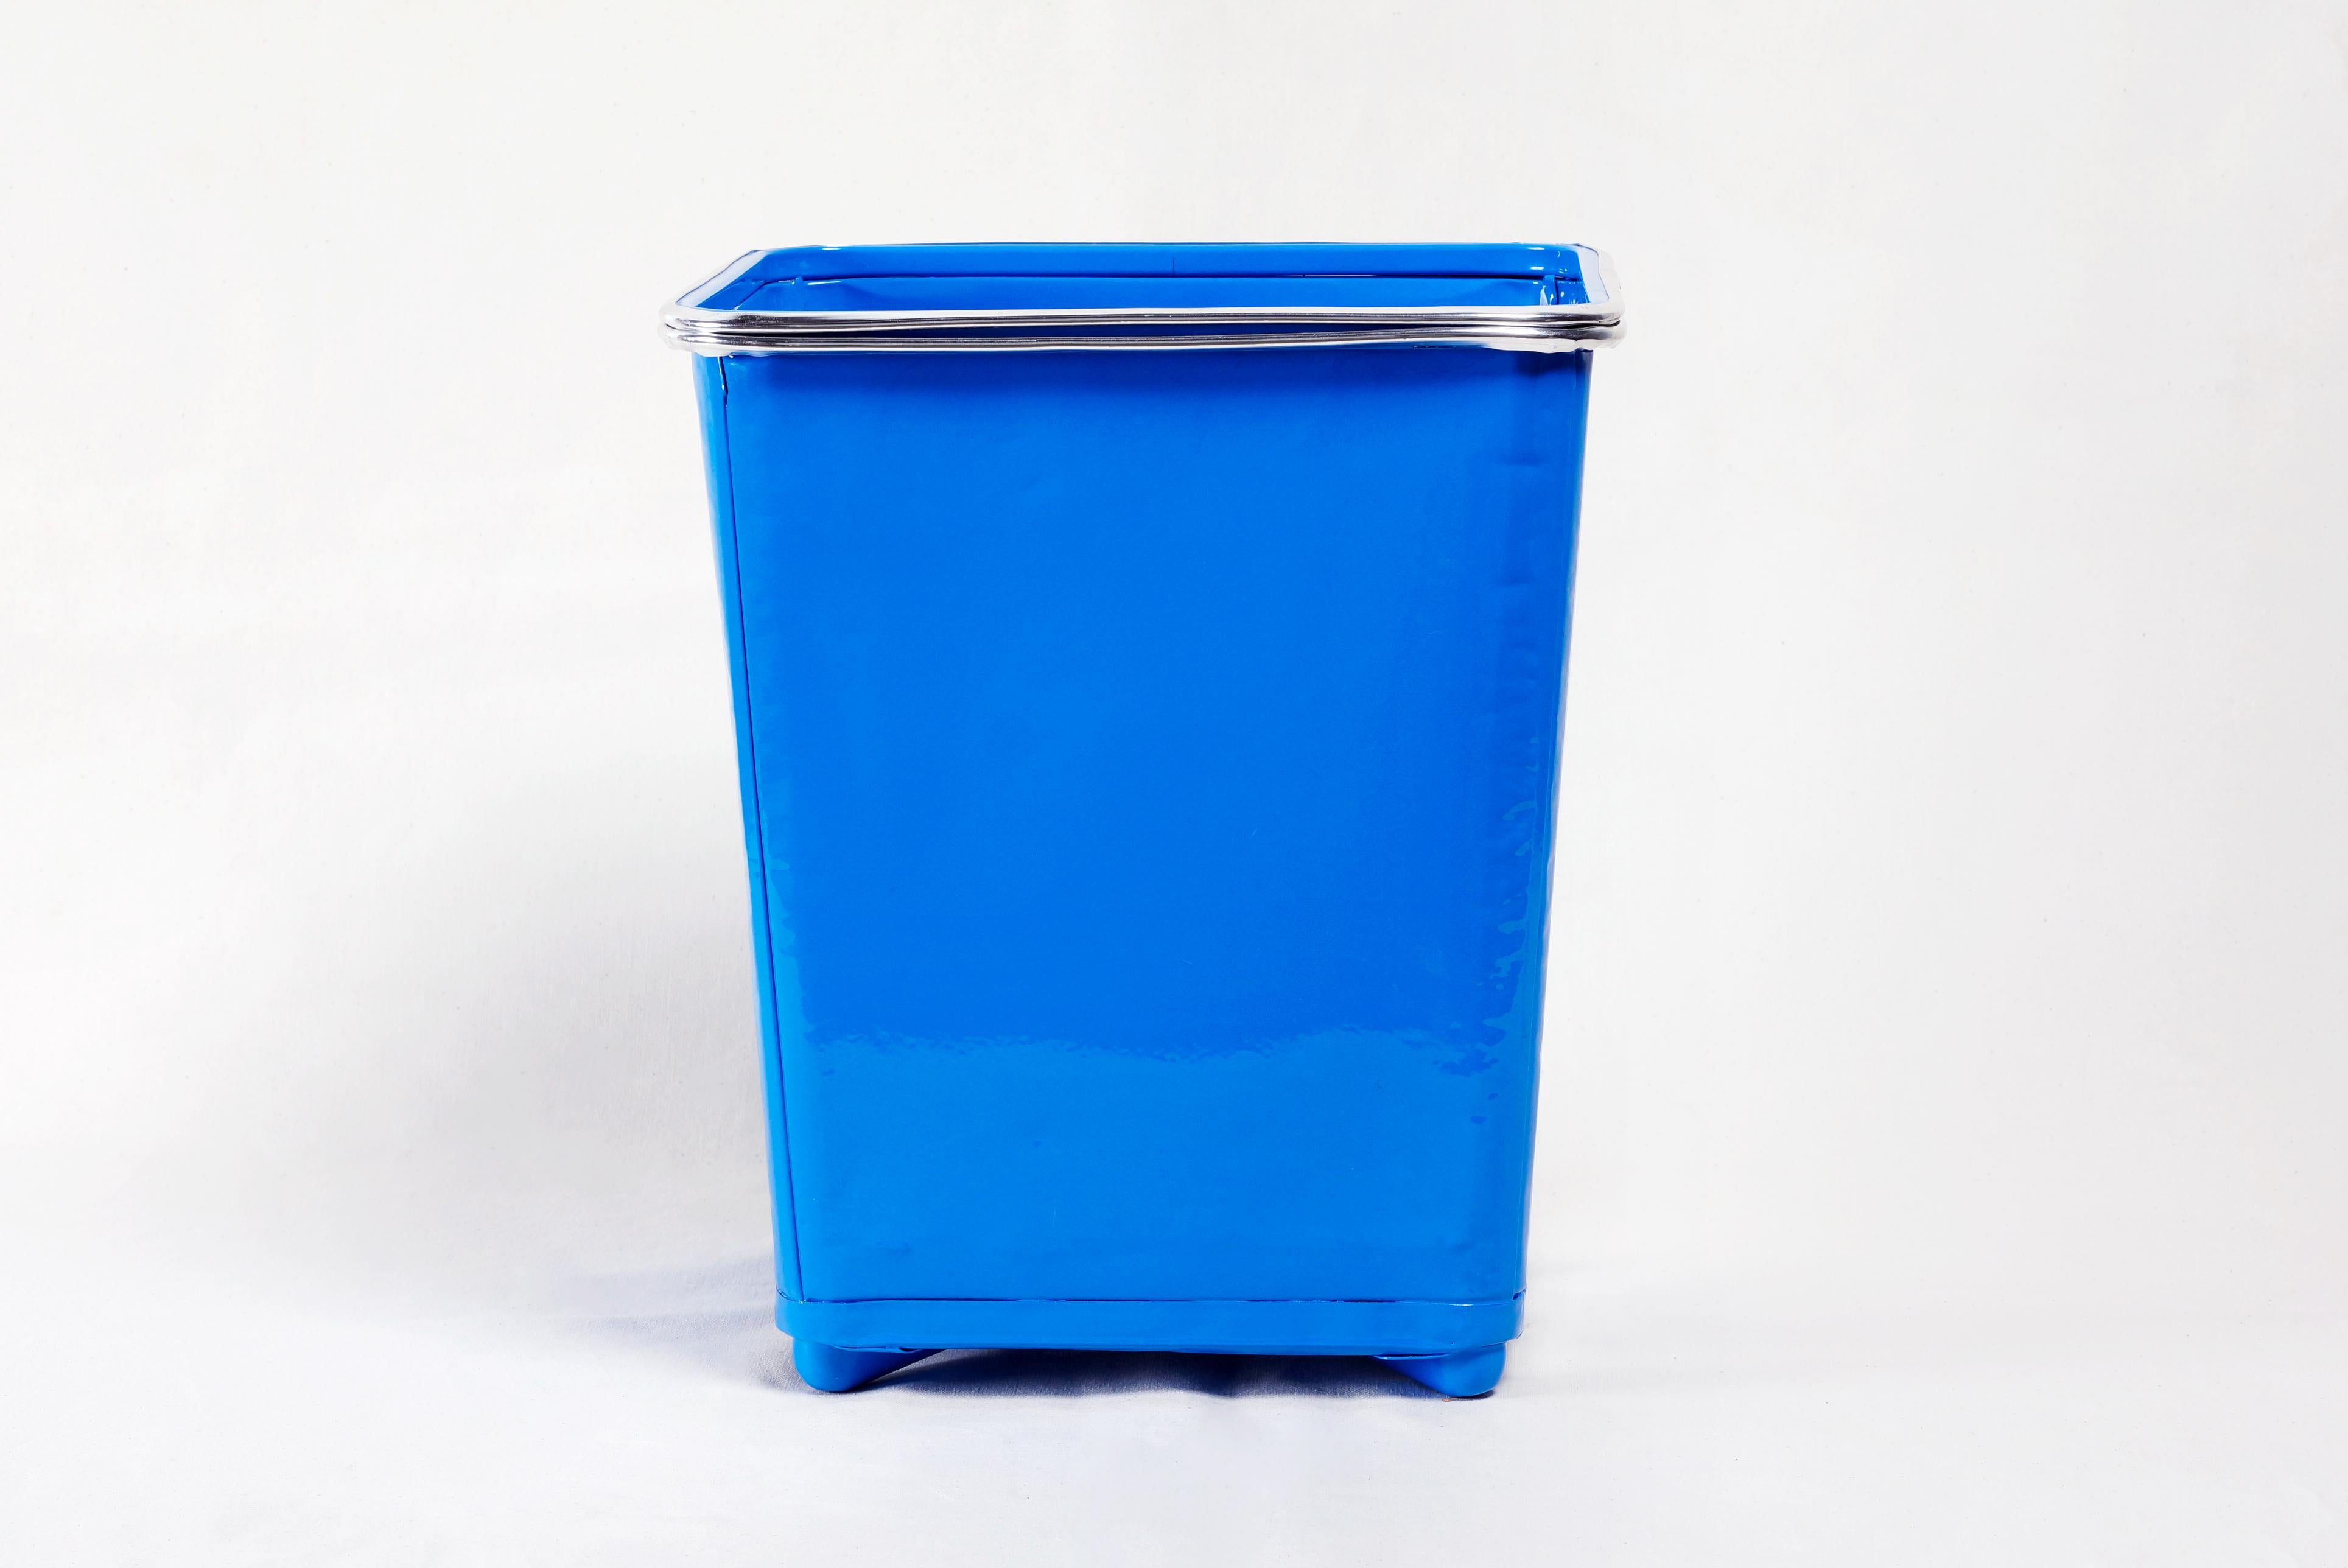 Excellent 1940s steel trash can with polished aluminium trim. Refinished in a gloss blue (BL05) powder coat. Square shape with steel feet that lift it slightly off the ground. Please note gentle dents to vintage steel and small perforation on the